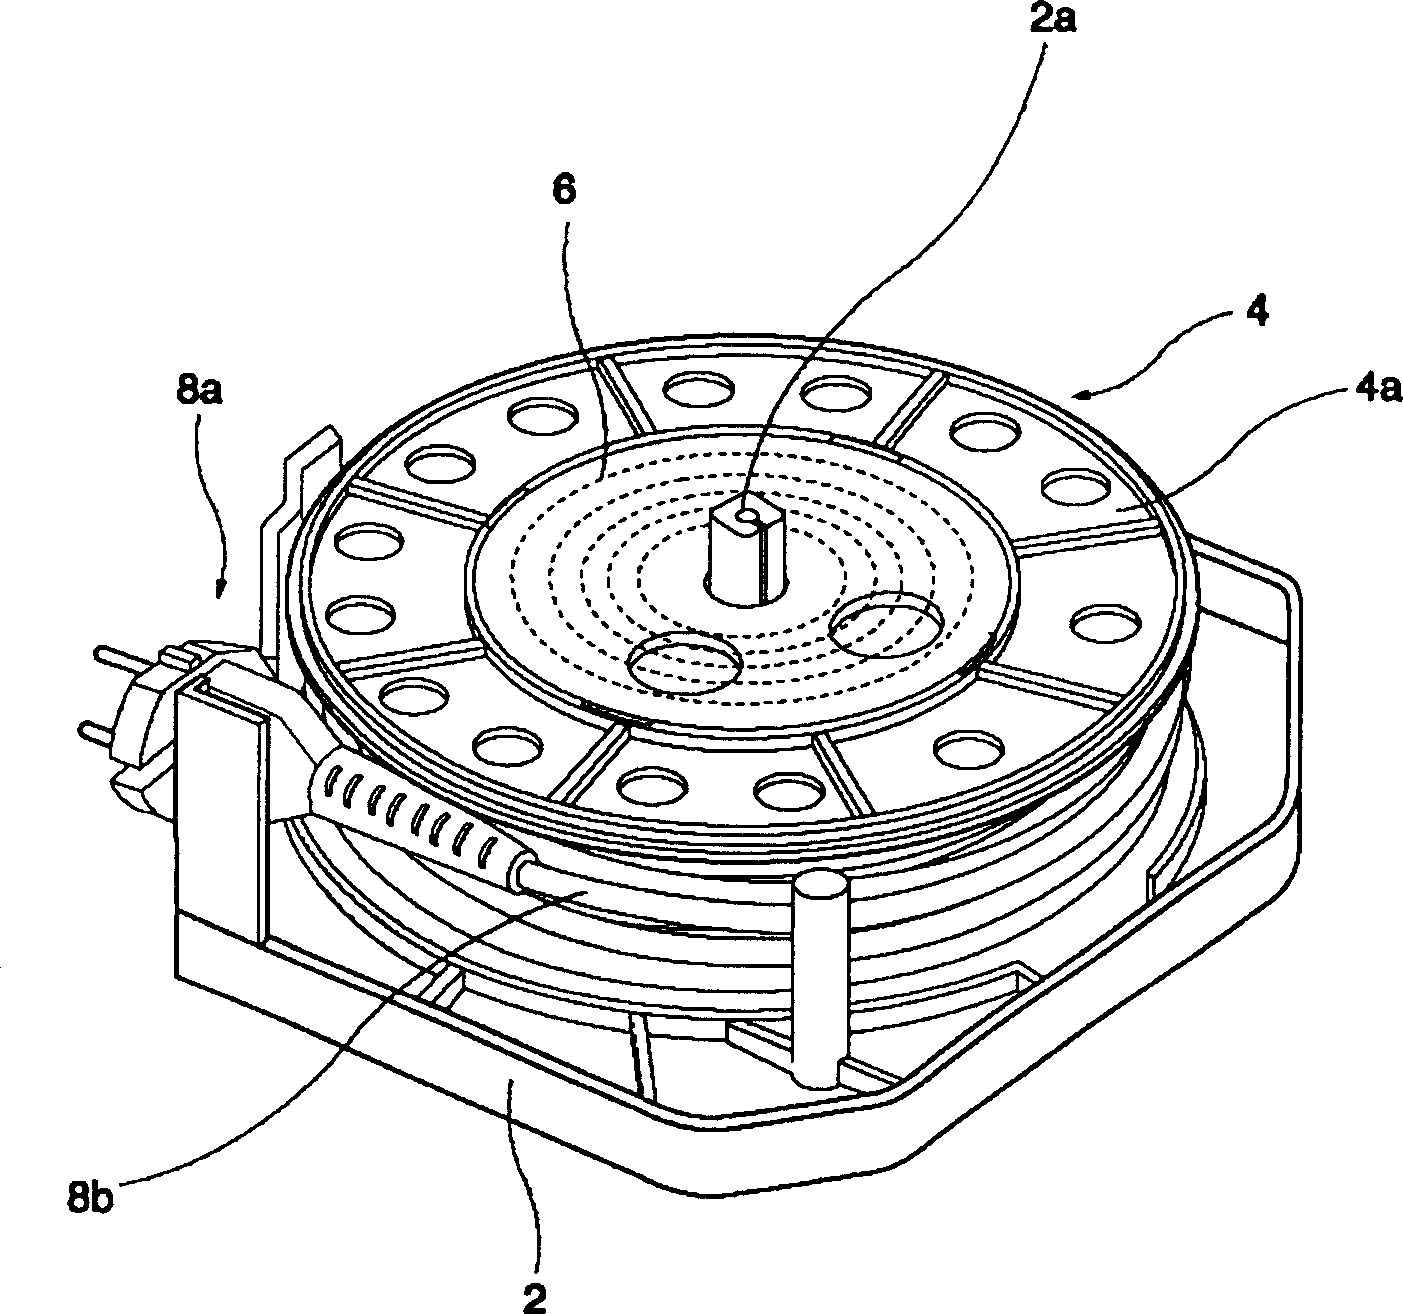 Vacuum cleaner electric wire bobbin disk assembly